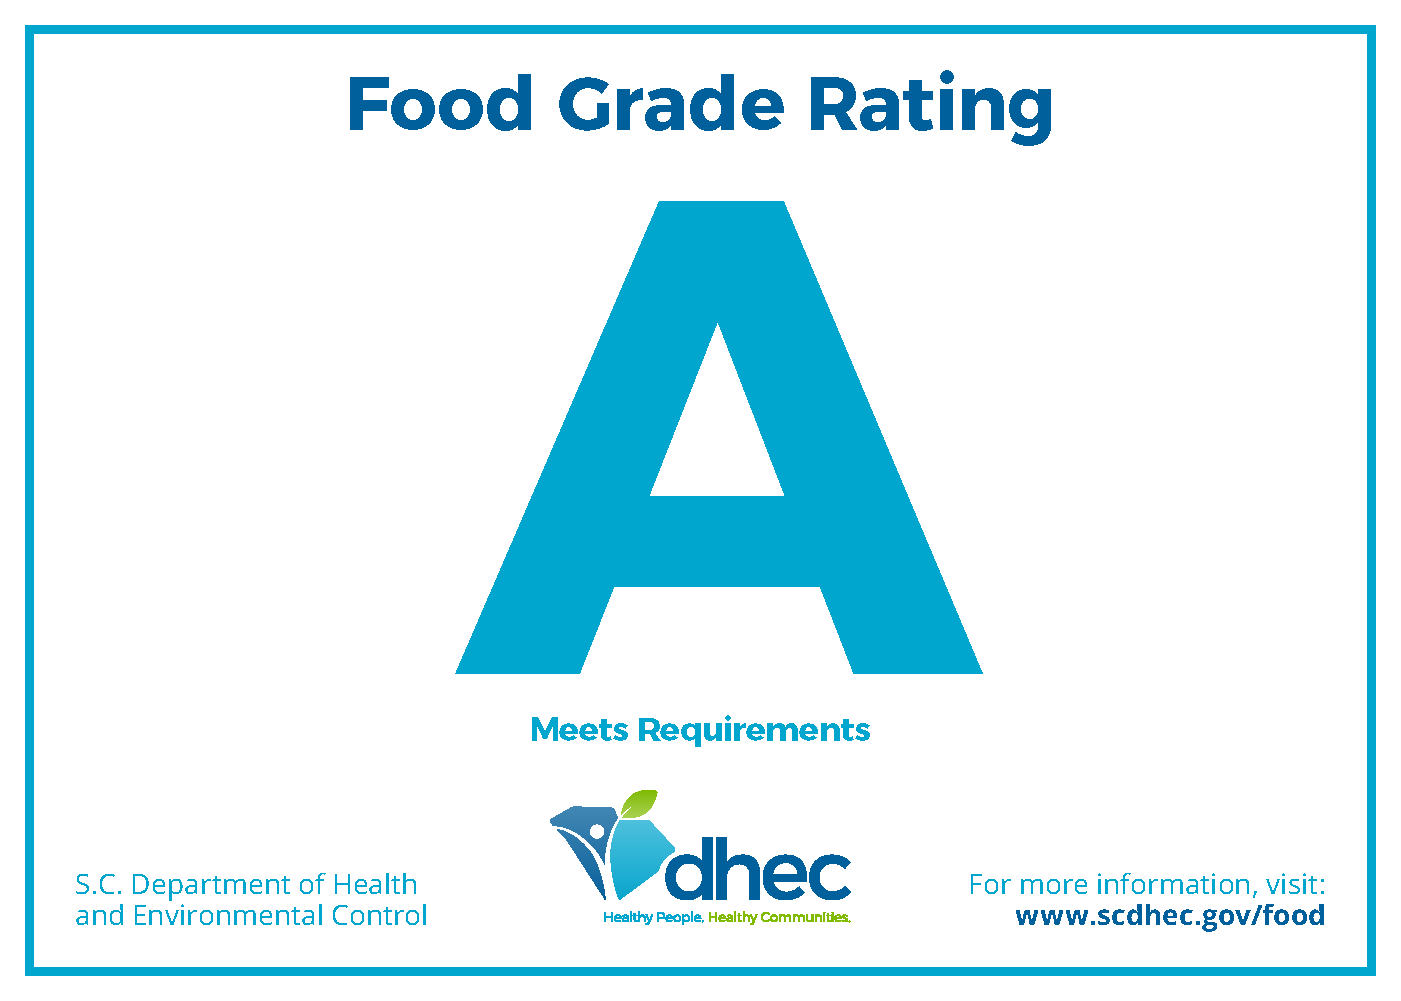 image of Grade A rating